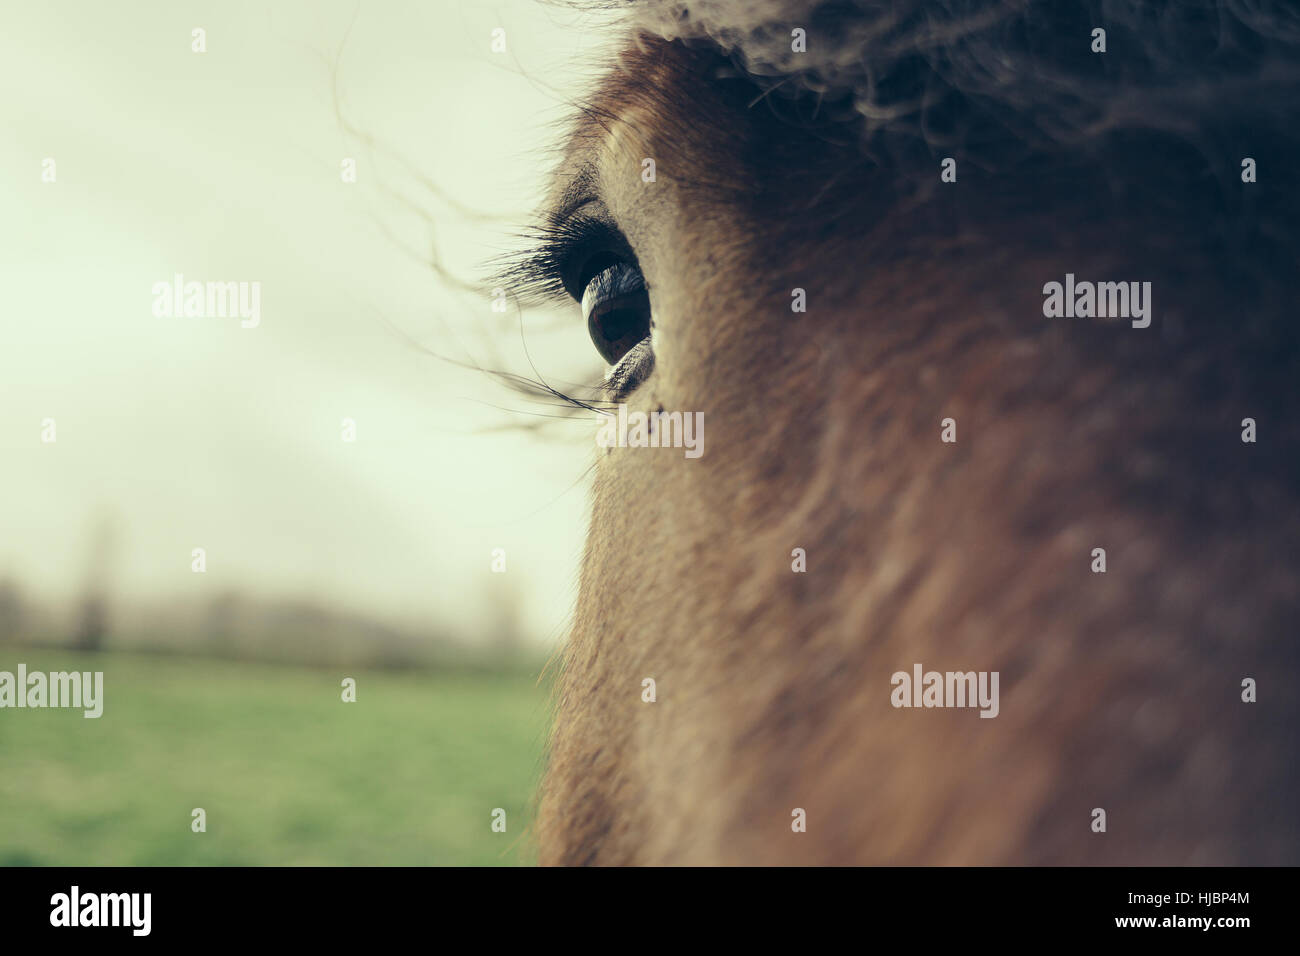 A closeup of the eye of a brown horse Stock Photo